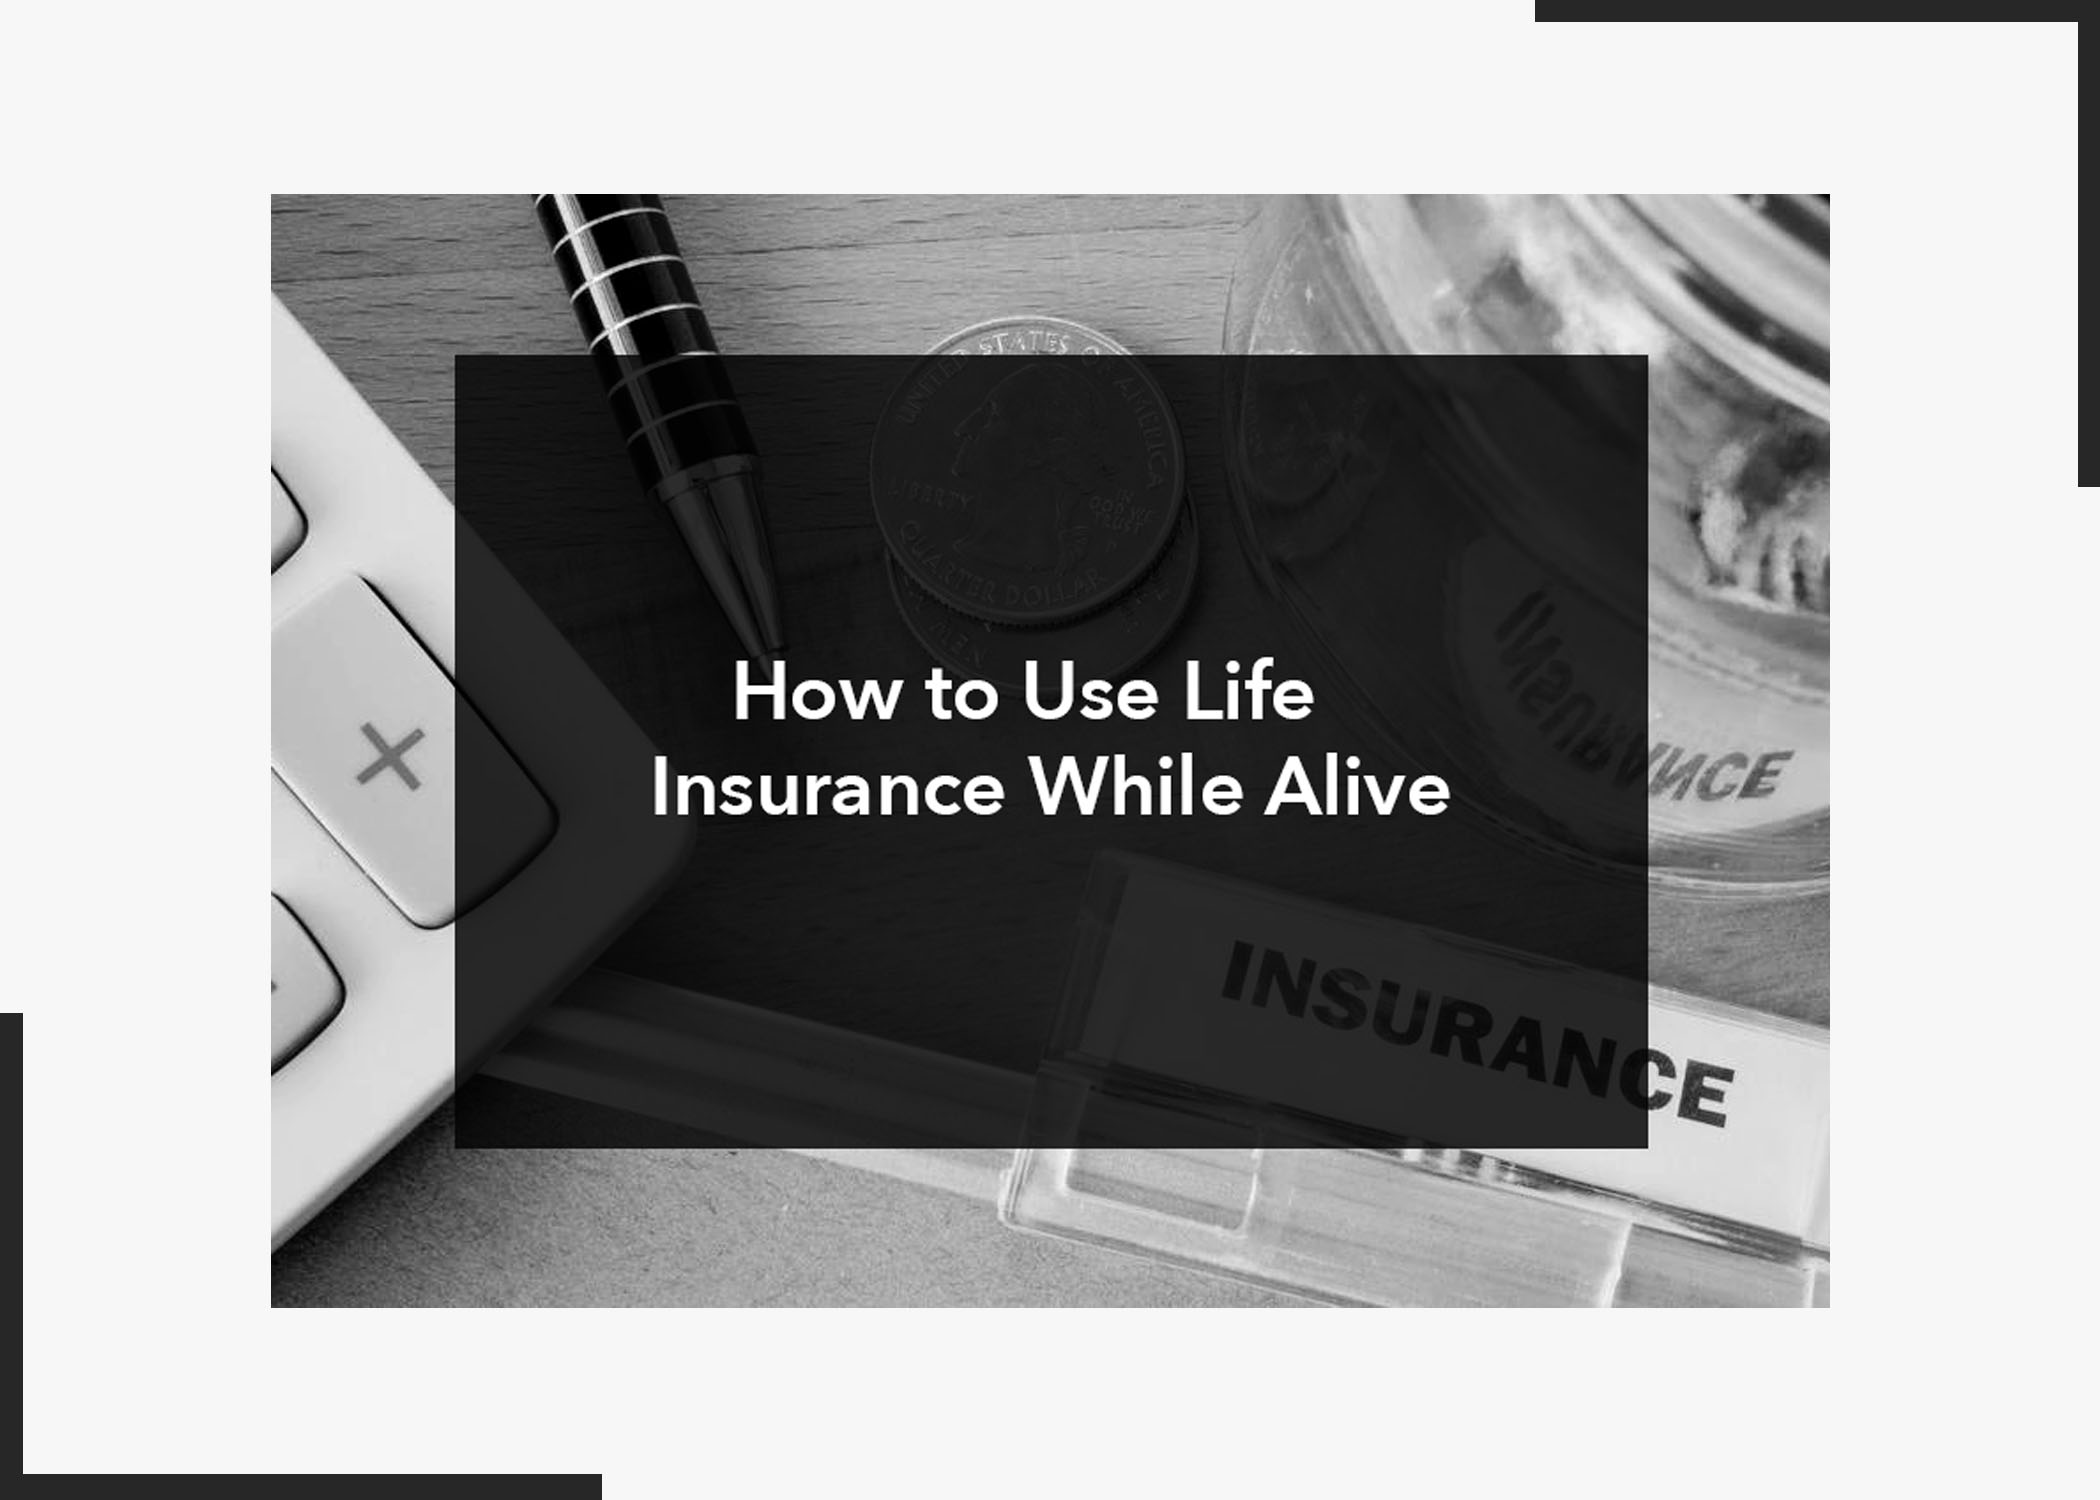 How to Use Life Insurance While Alive